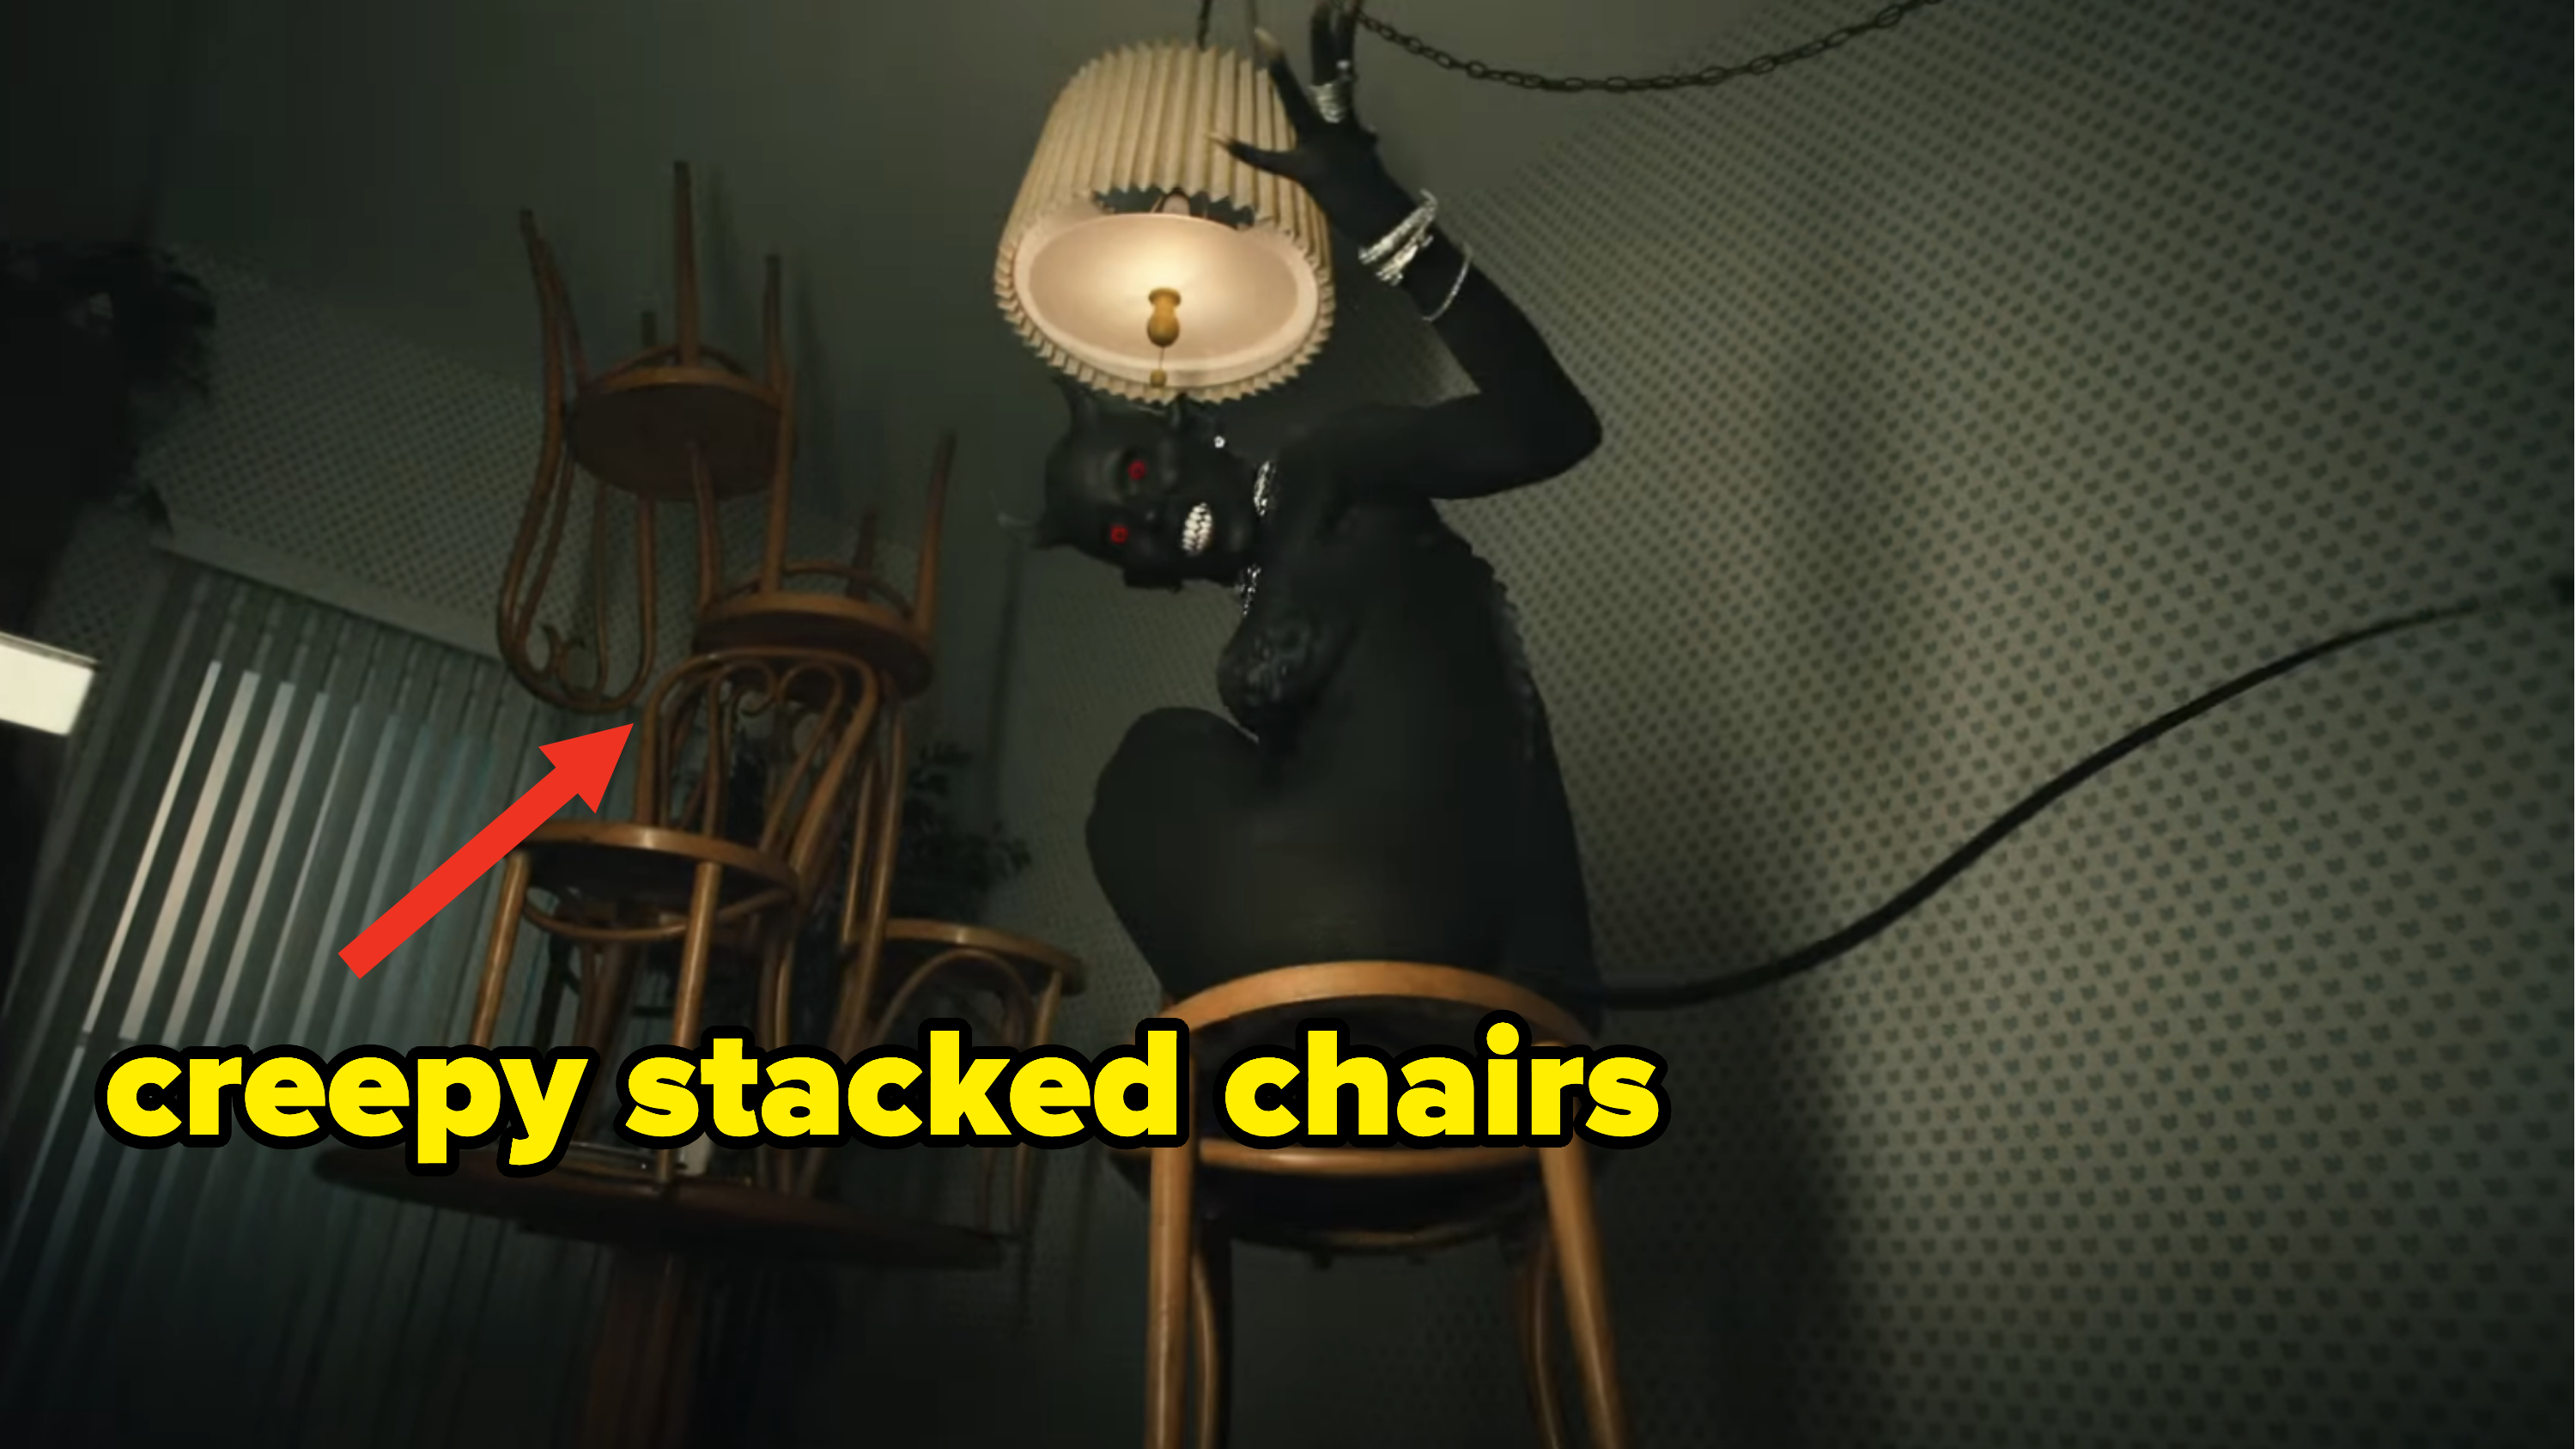 Creepy stacked chairs on the ceiling in the video